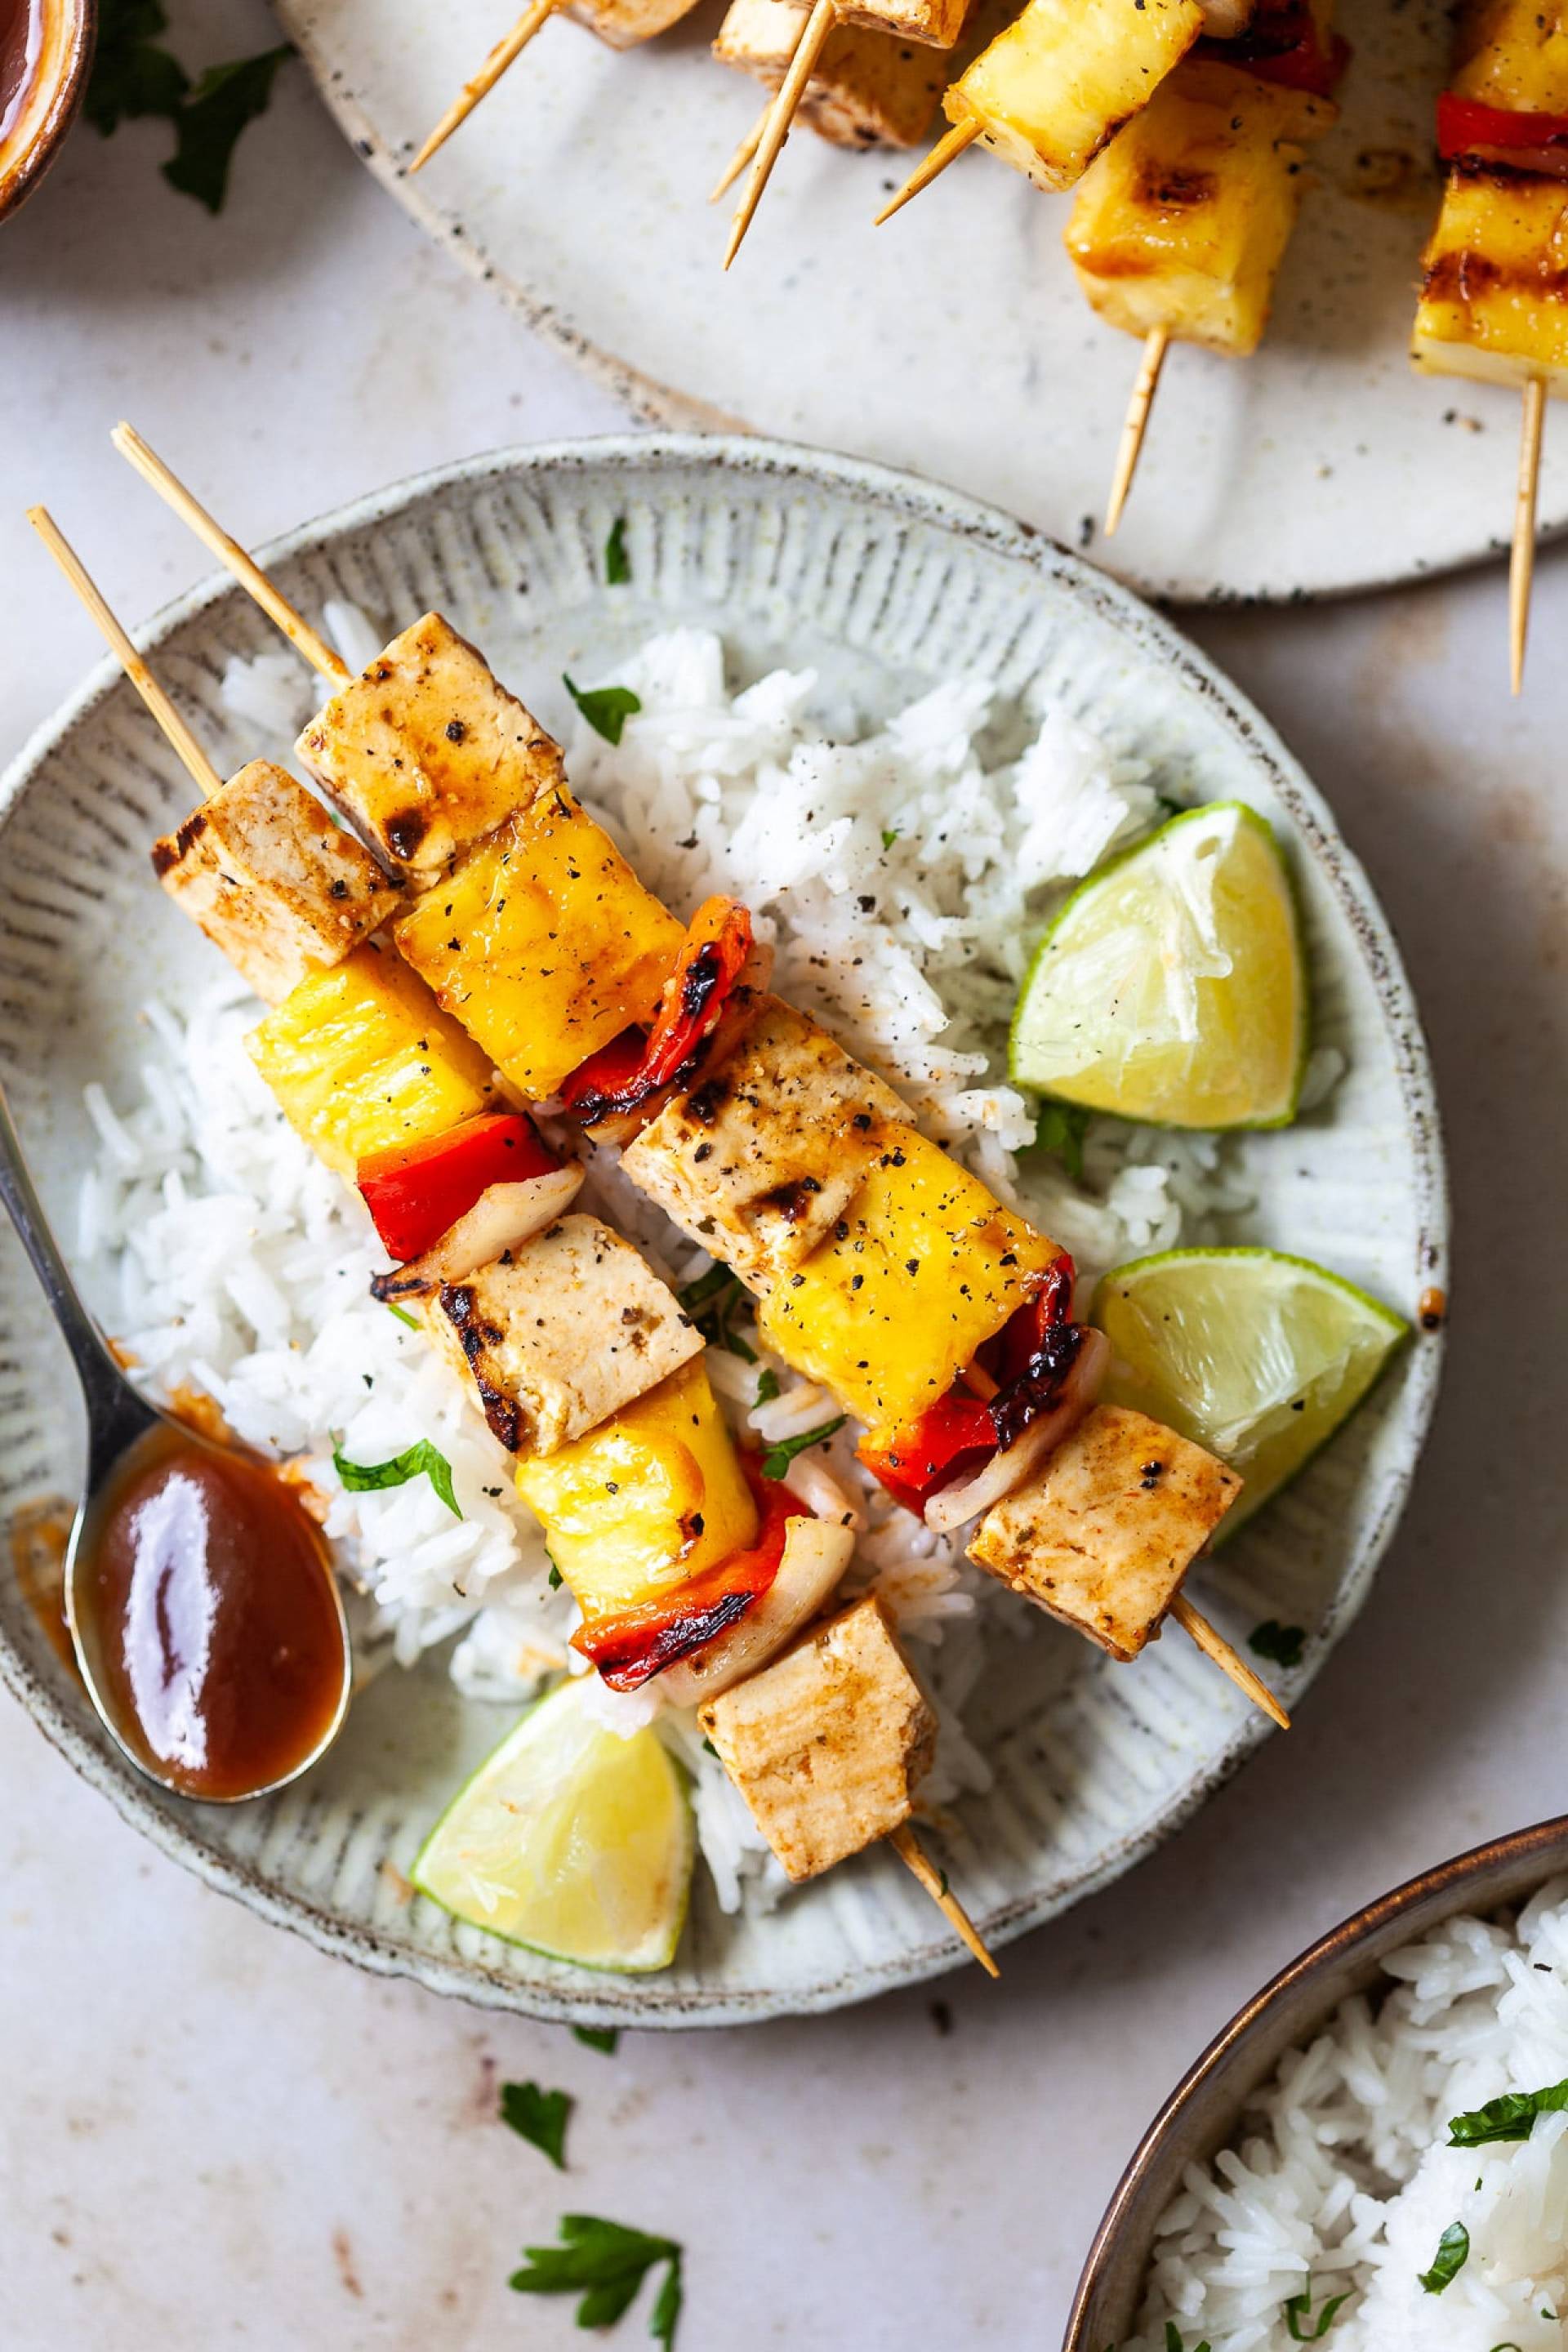 Kids Meal: BBQ Tofu and Veggie Skewers with Burrito Rice and a Chocolate Chip Cookie